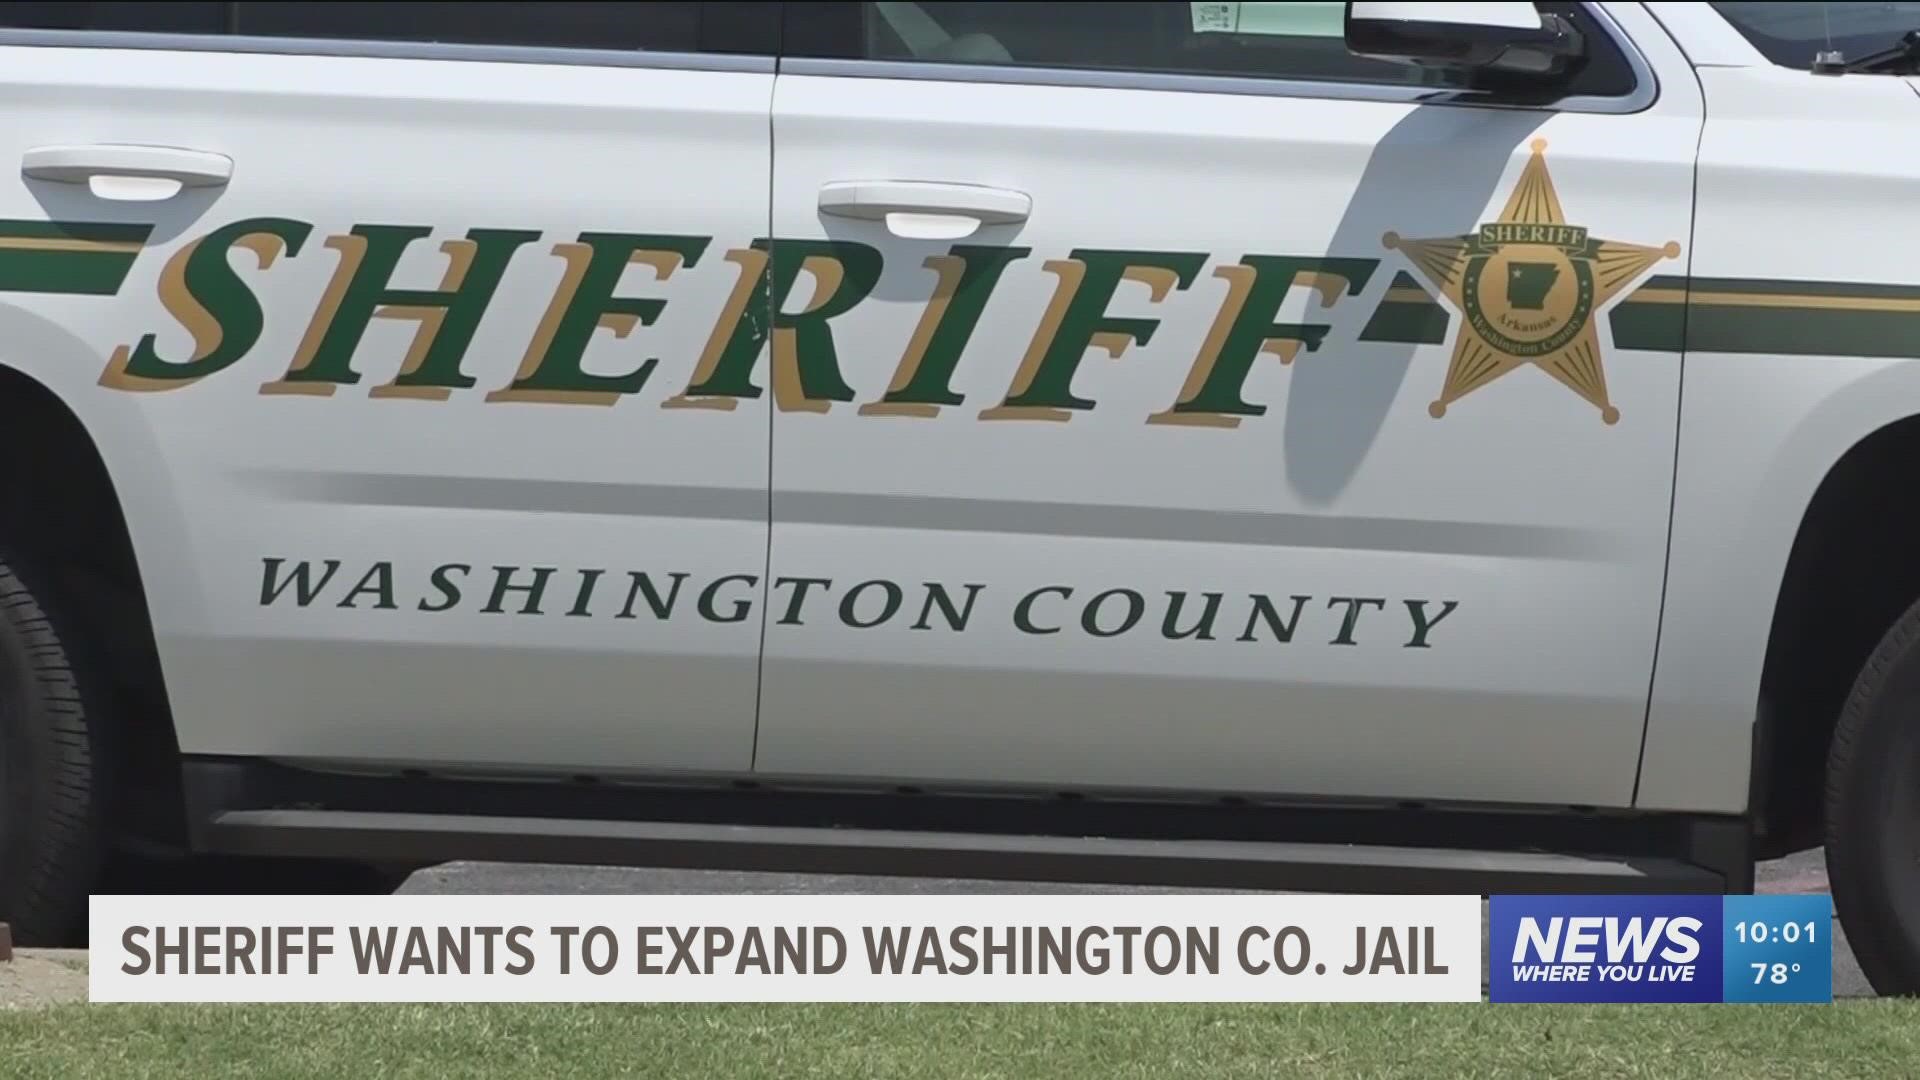 Washington County officials intend to ask the Quorum Court to push a $60 million jail expansion out to voters.